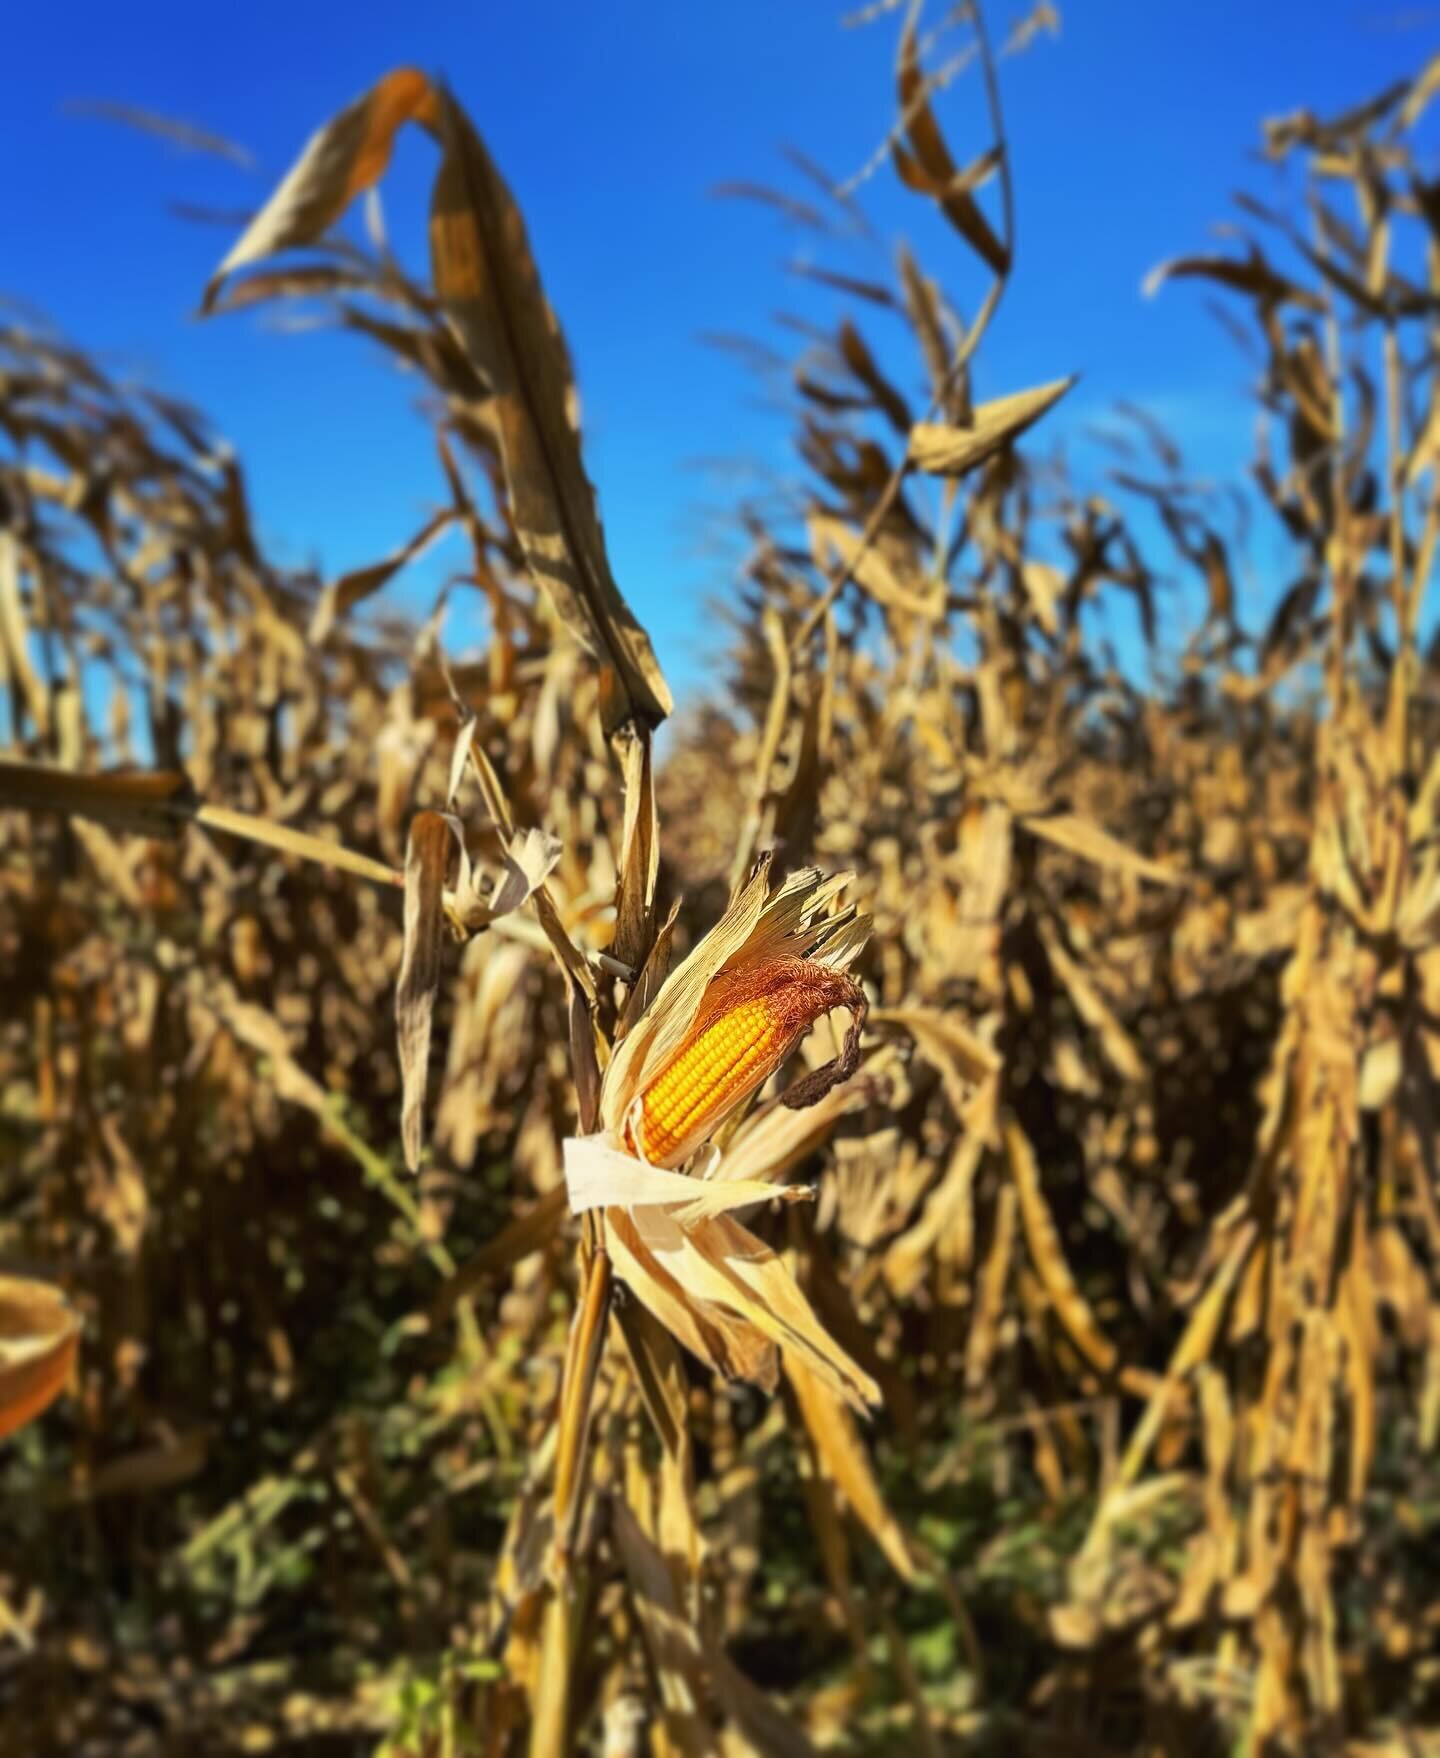 It&rsquo;s harvest time for our estate-grown whiskey 🌽 at the farm! 

Pictured here is one of the base grains used in our Bourbon mashbill. Our farmers allow the corn to dry out naturally in the field before it&rsquo;s harvested, cleaned and stored 